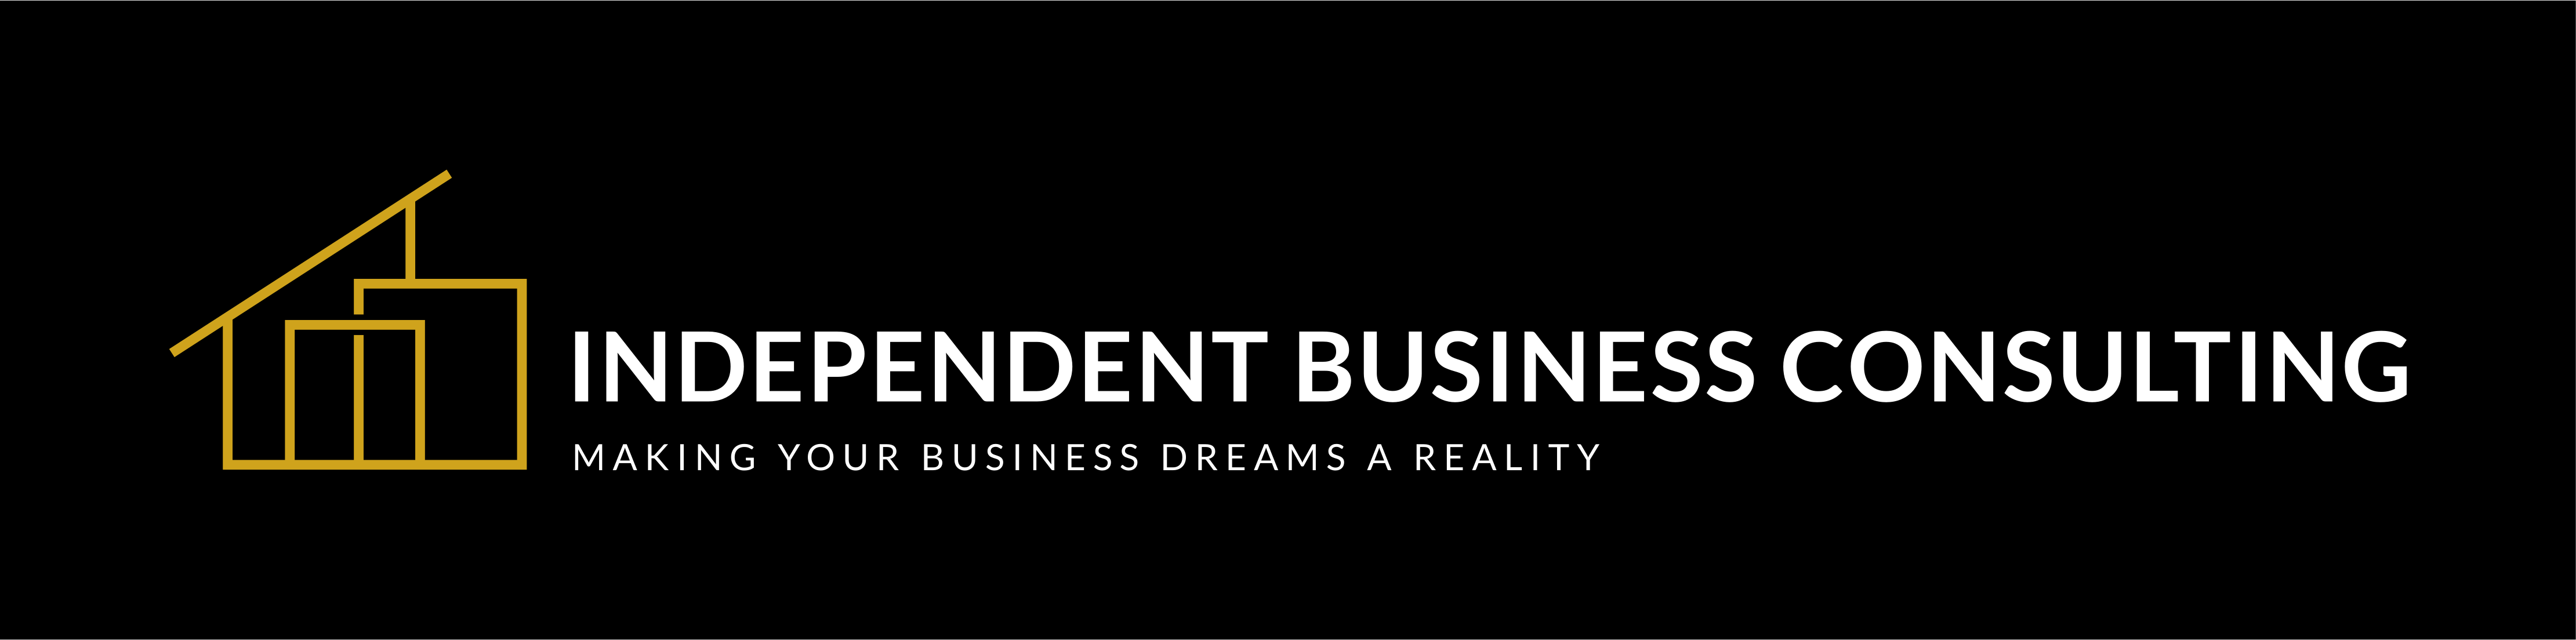 Independent Business Consulting, LLC